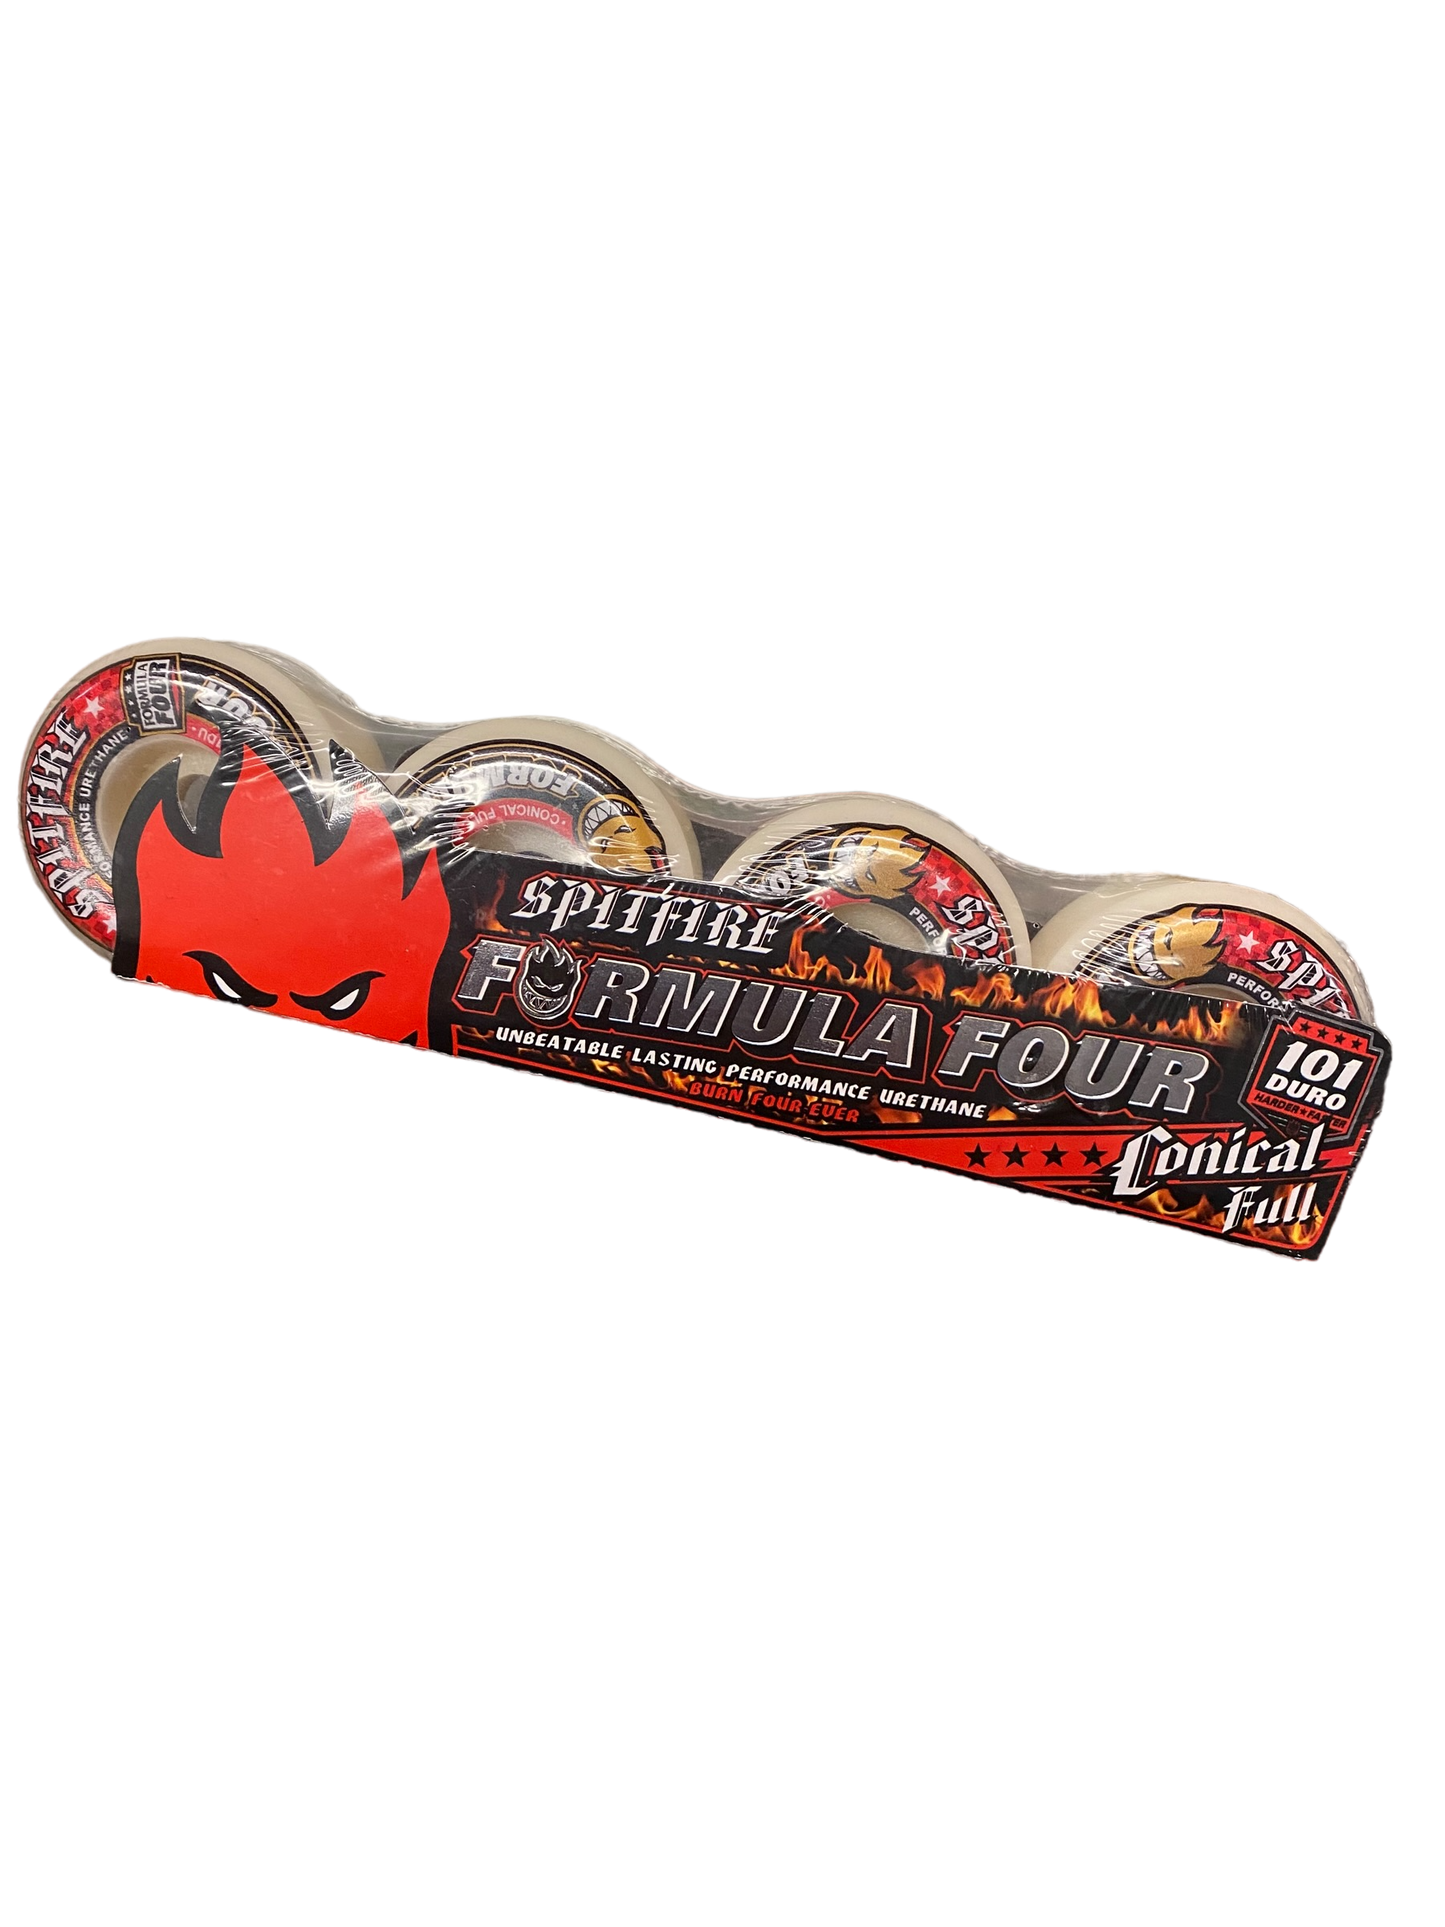 Spitfire Formula Four 101a Conical Full